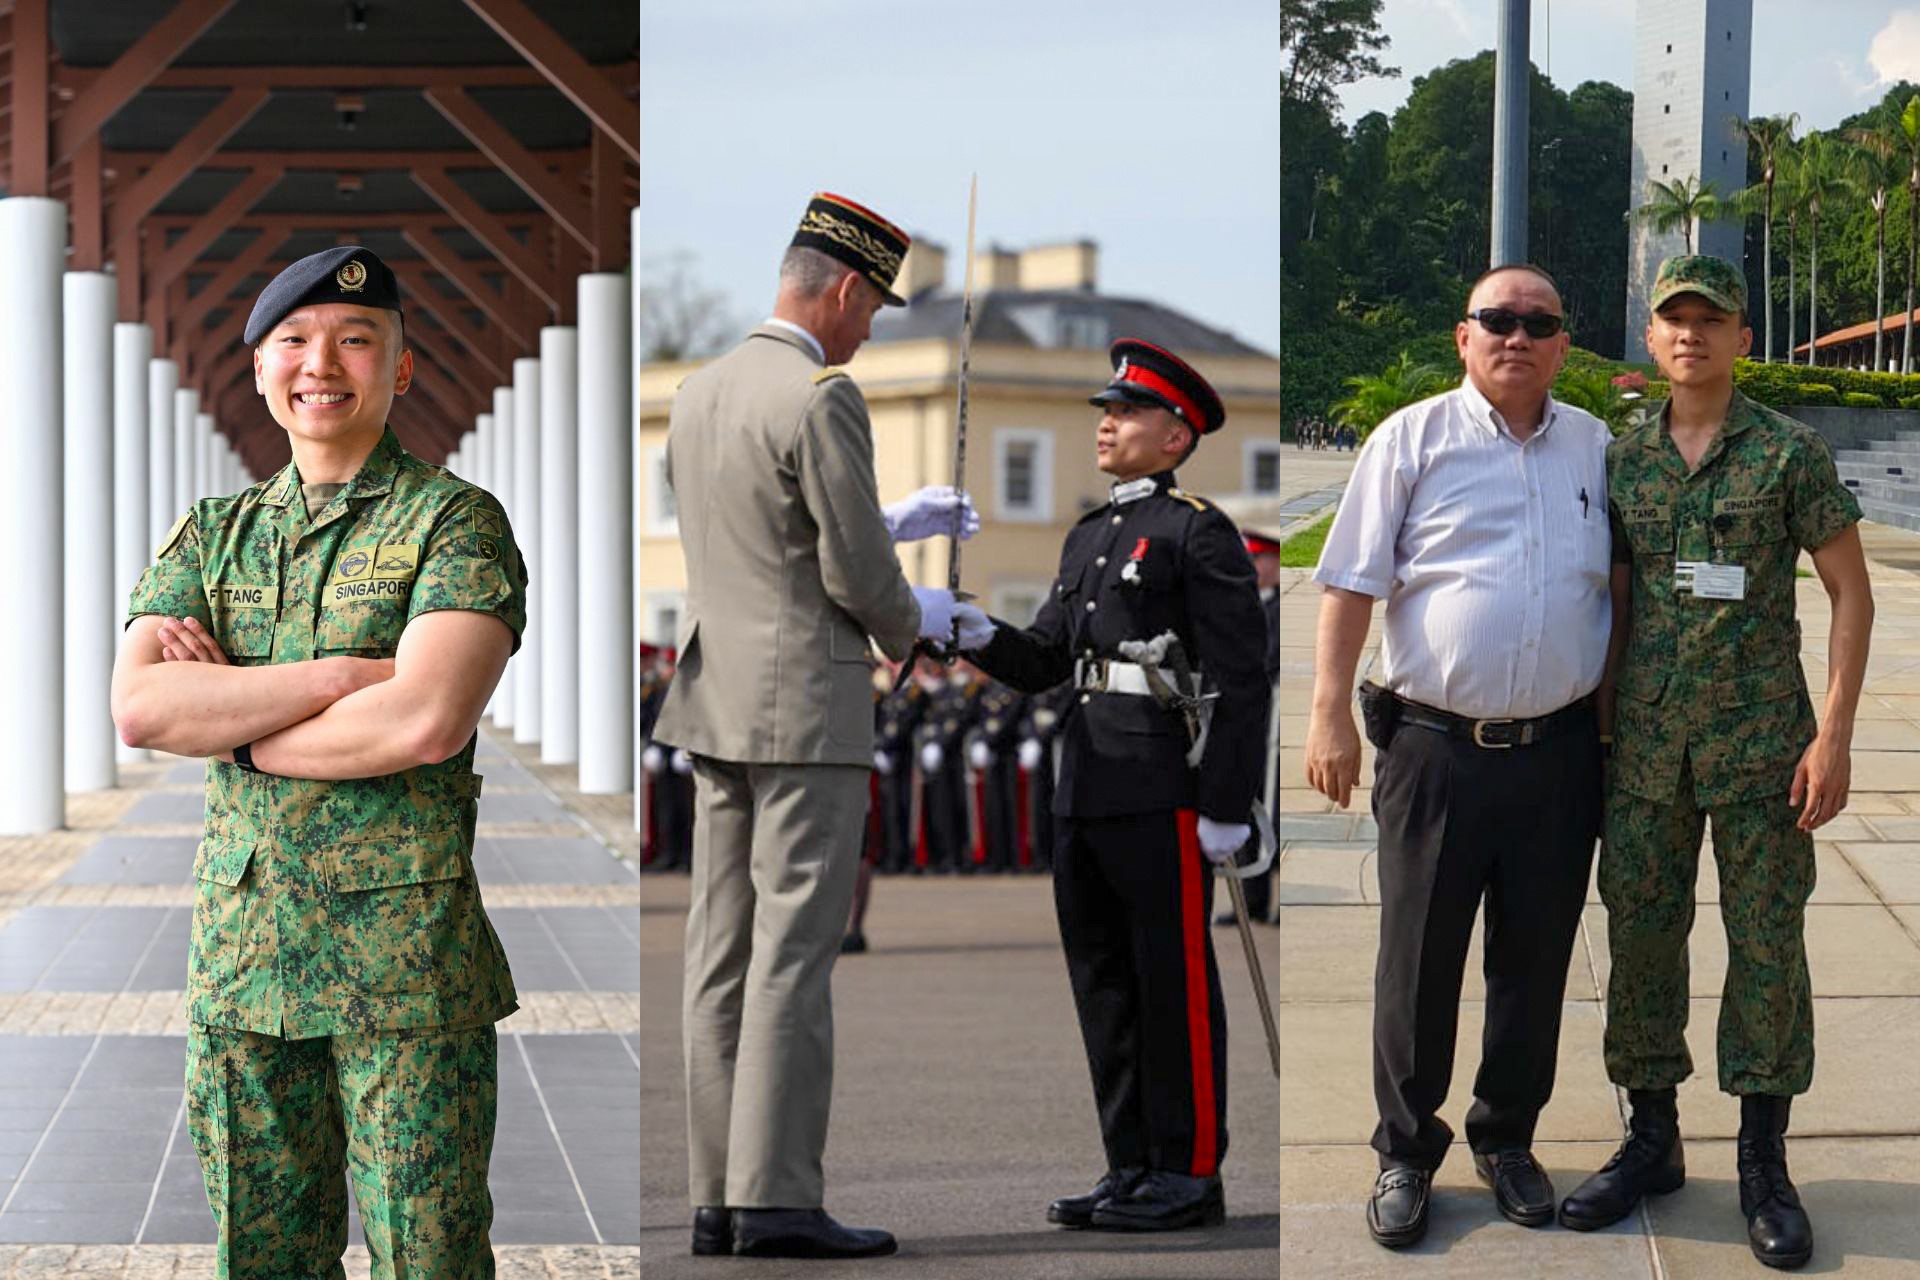 Doing it for Dad: S'pore officer awarded Best International Cadet in British military academy